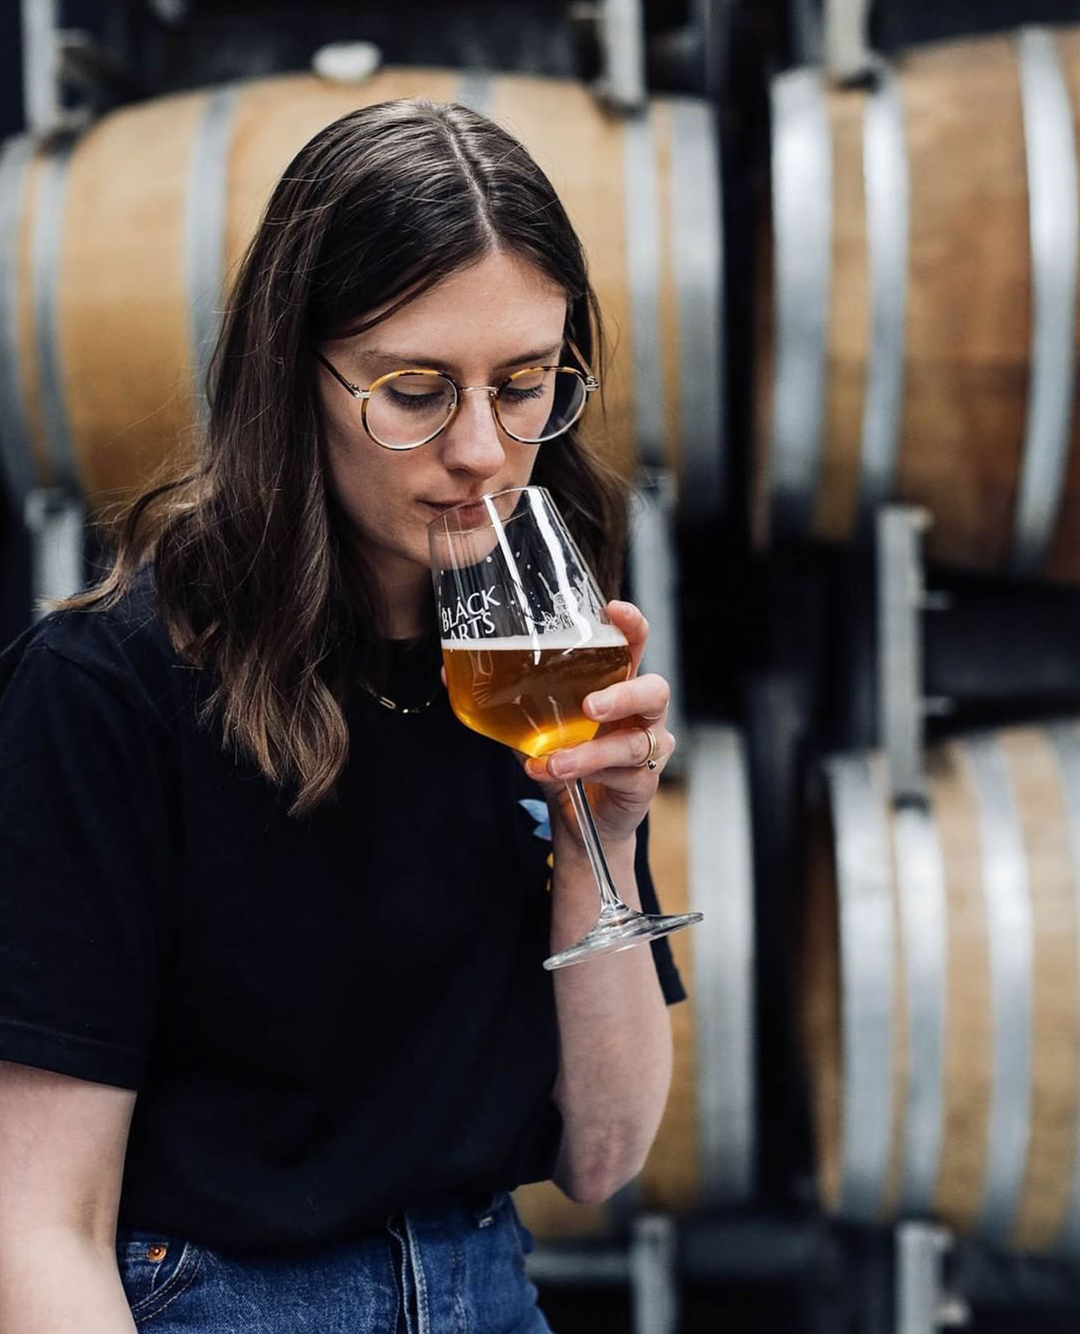 woman drinking beer from glass and barrels in the background